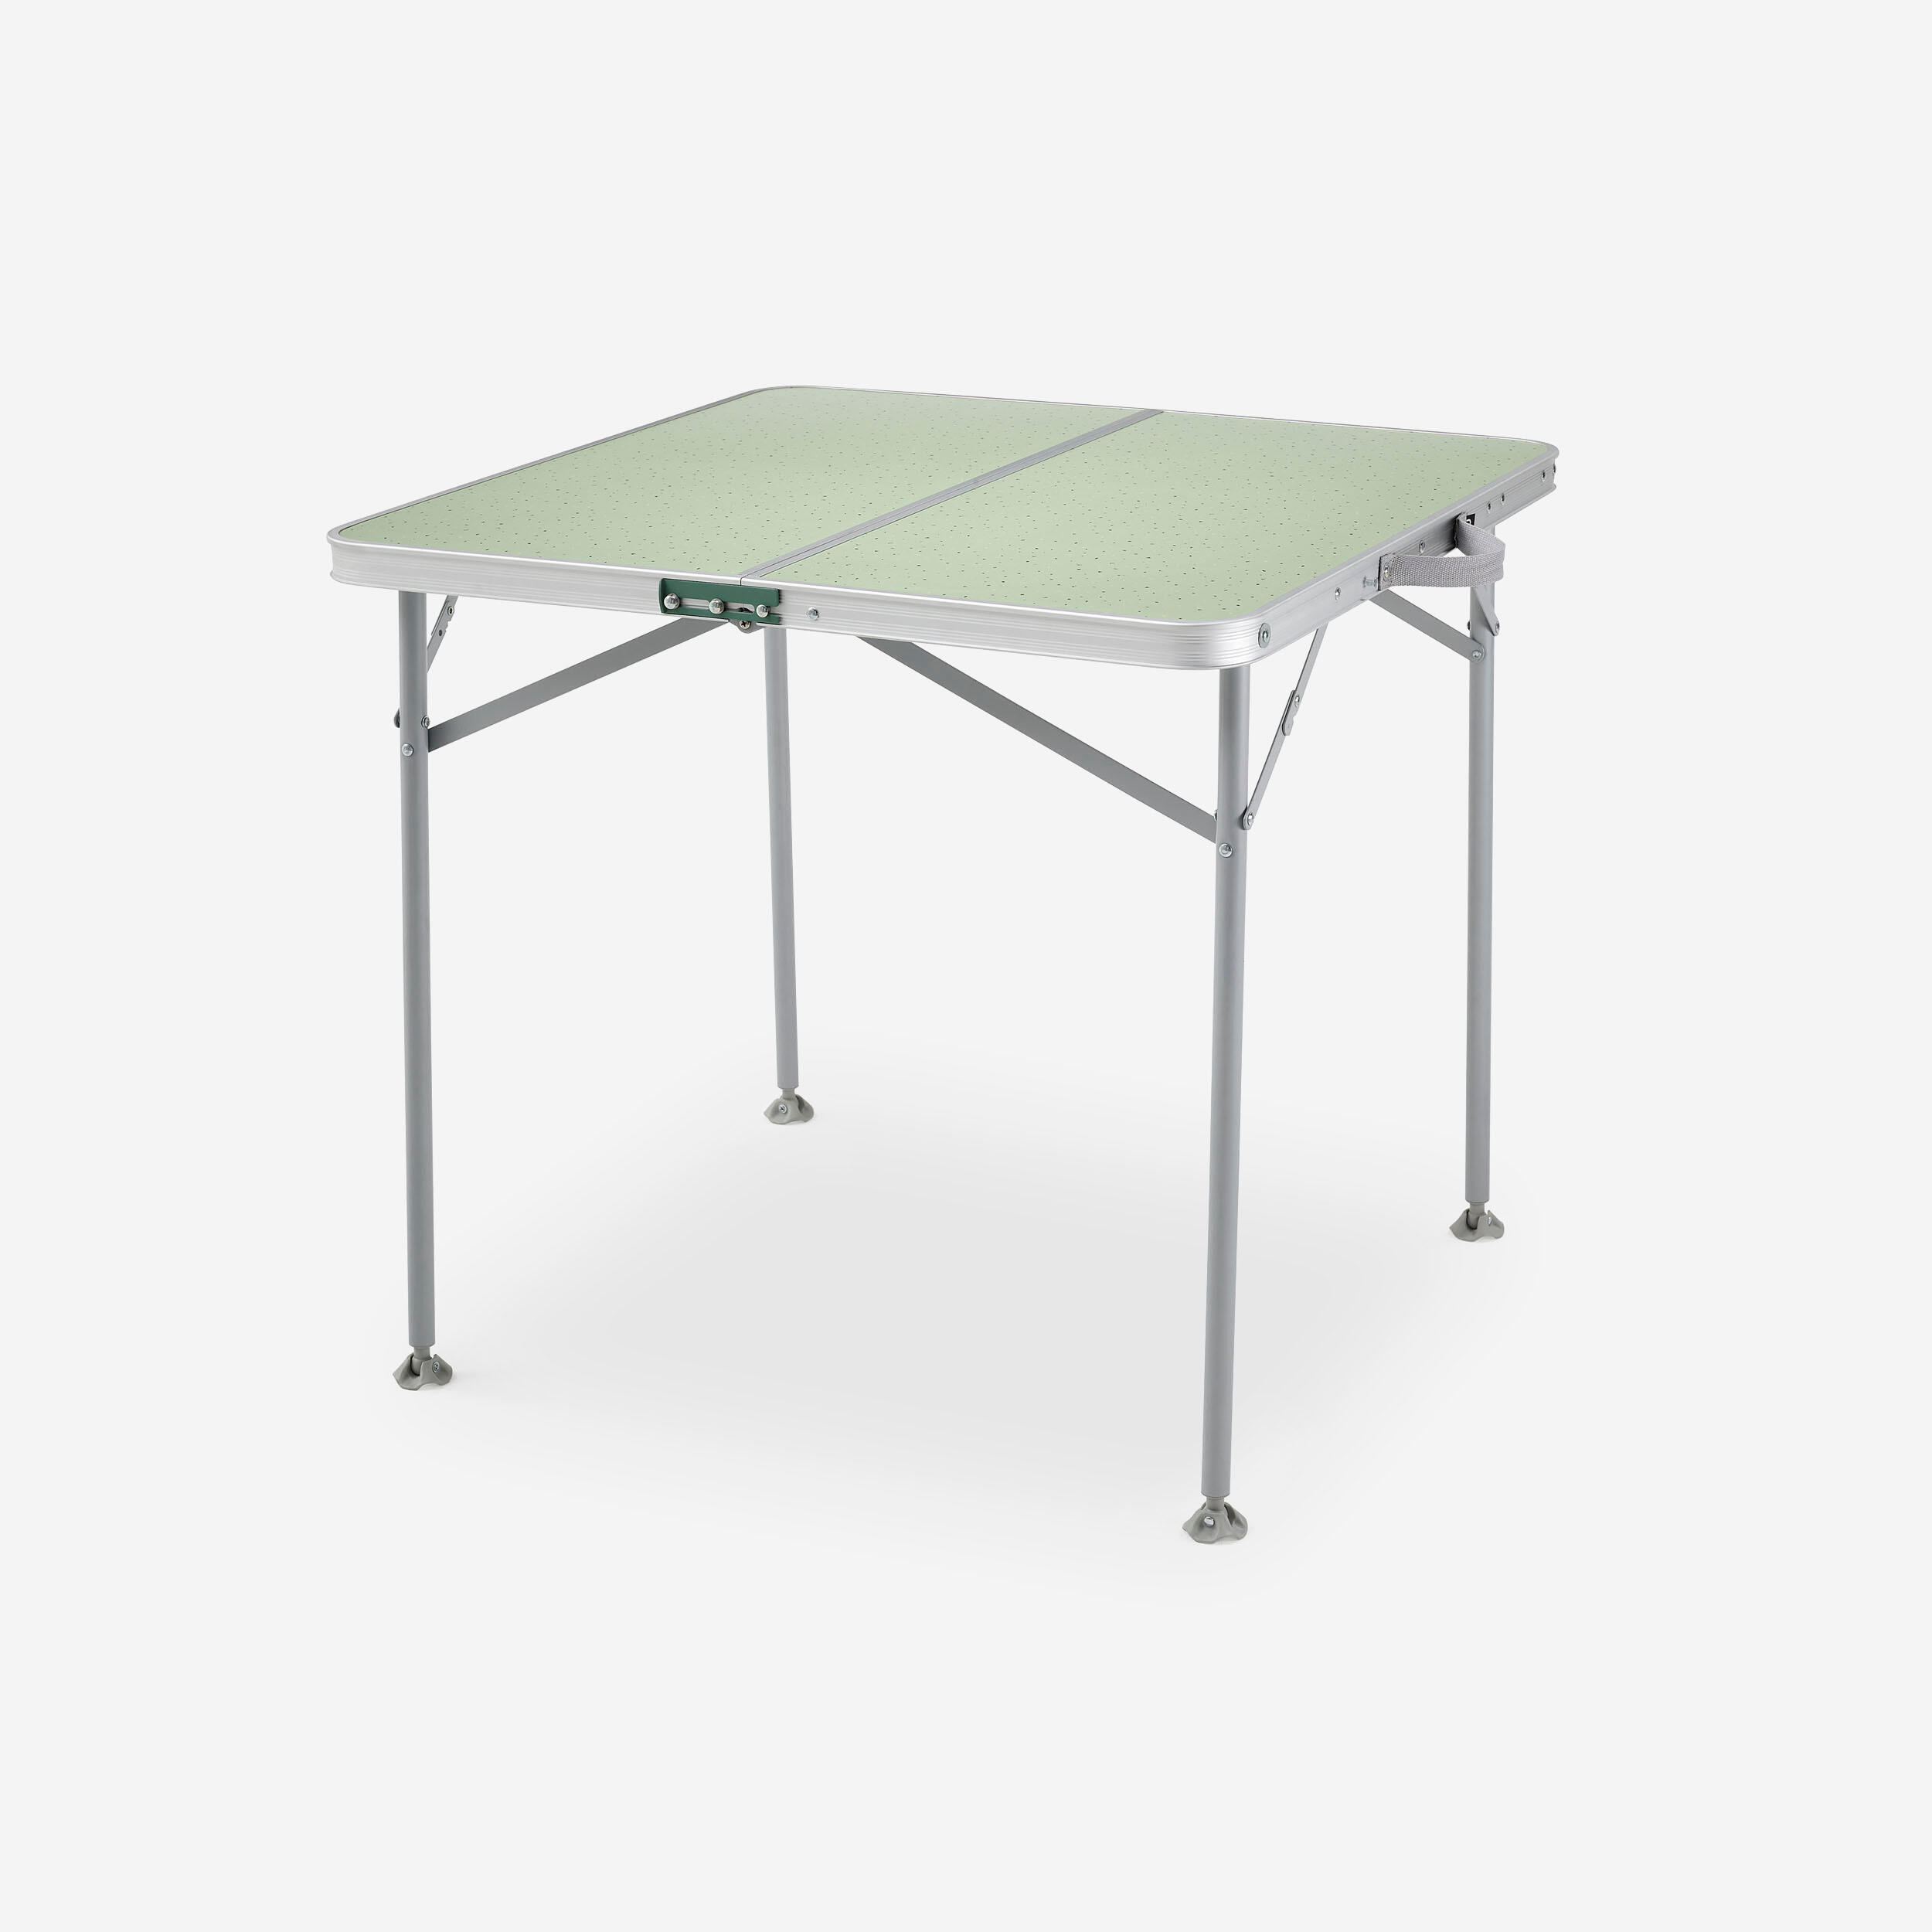 FOLDING CAMPING TABLE - 4 PEOPLE 1/11